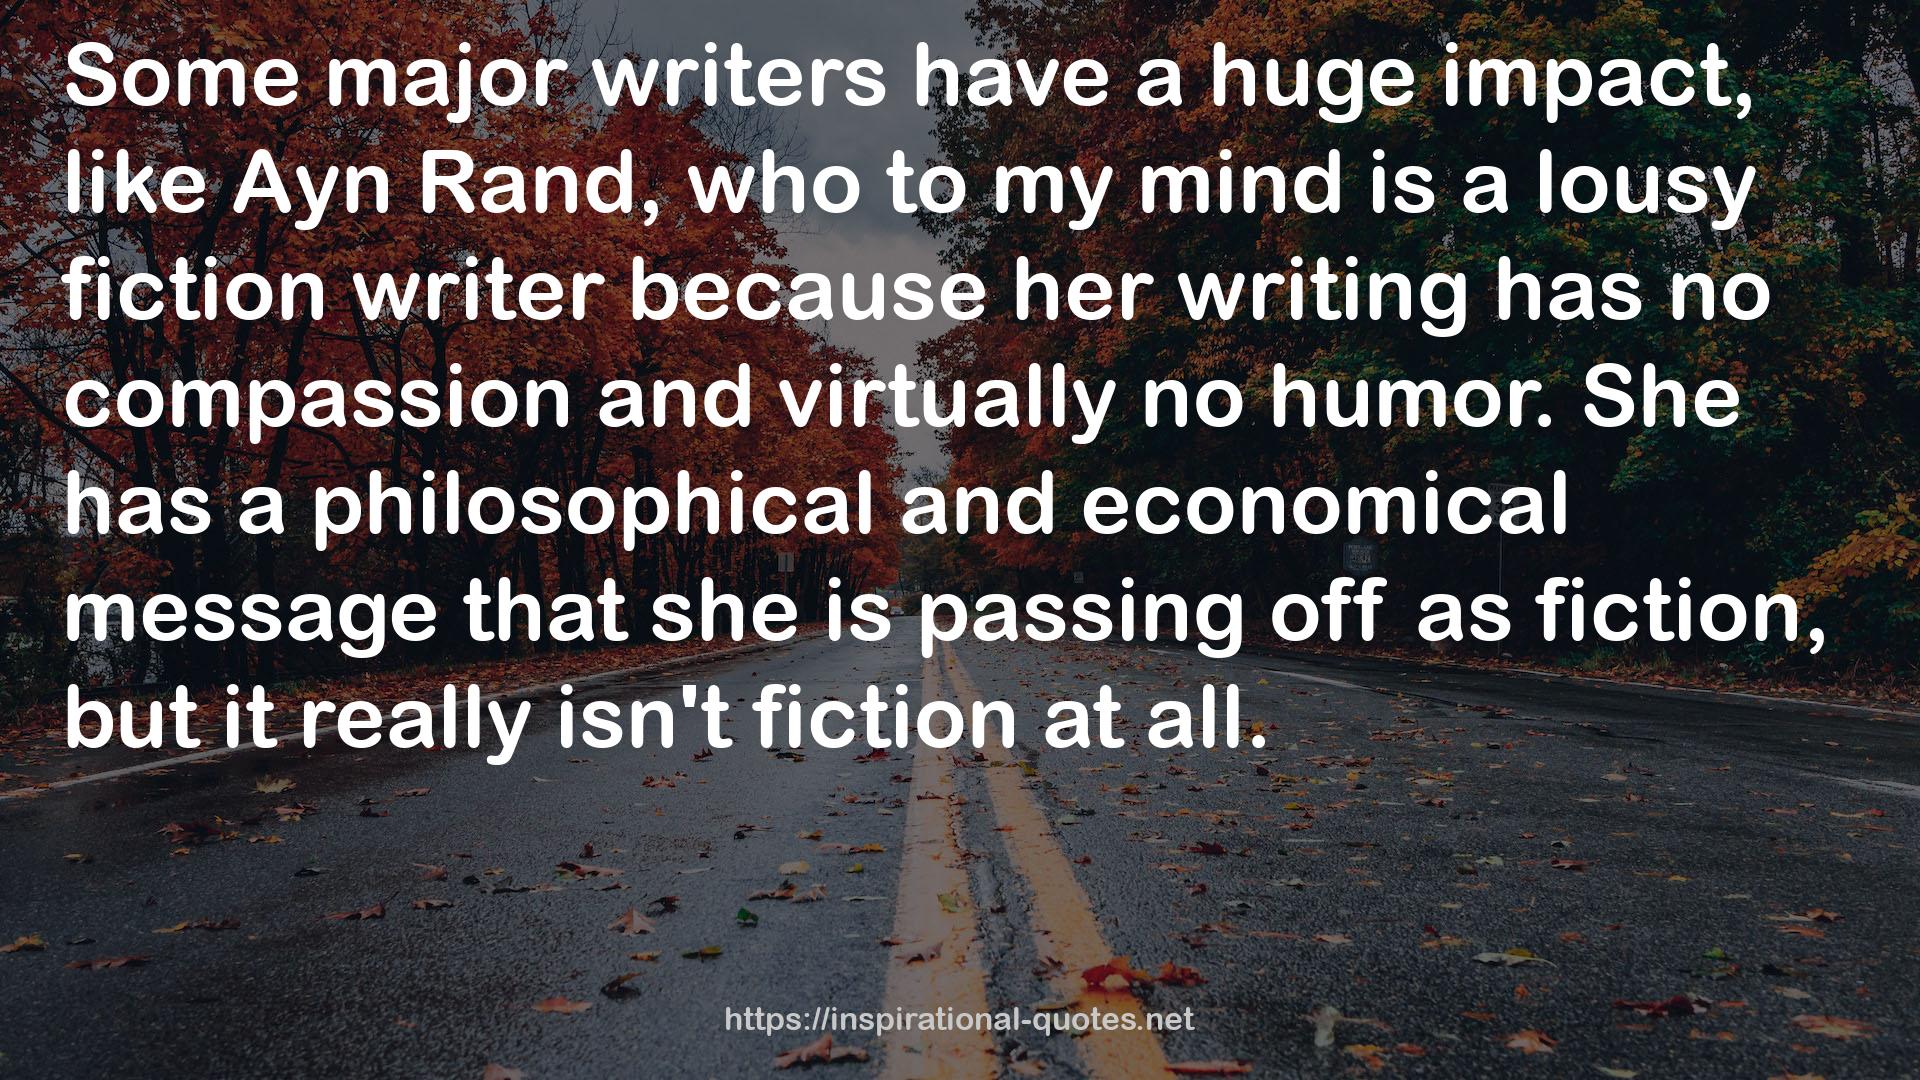 a lousy fiction writer  QUOTES